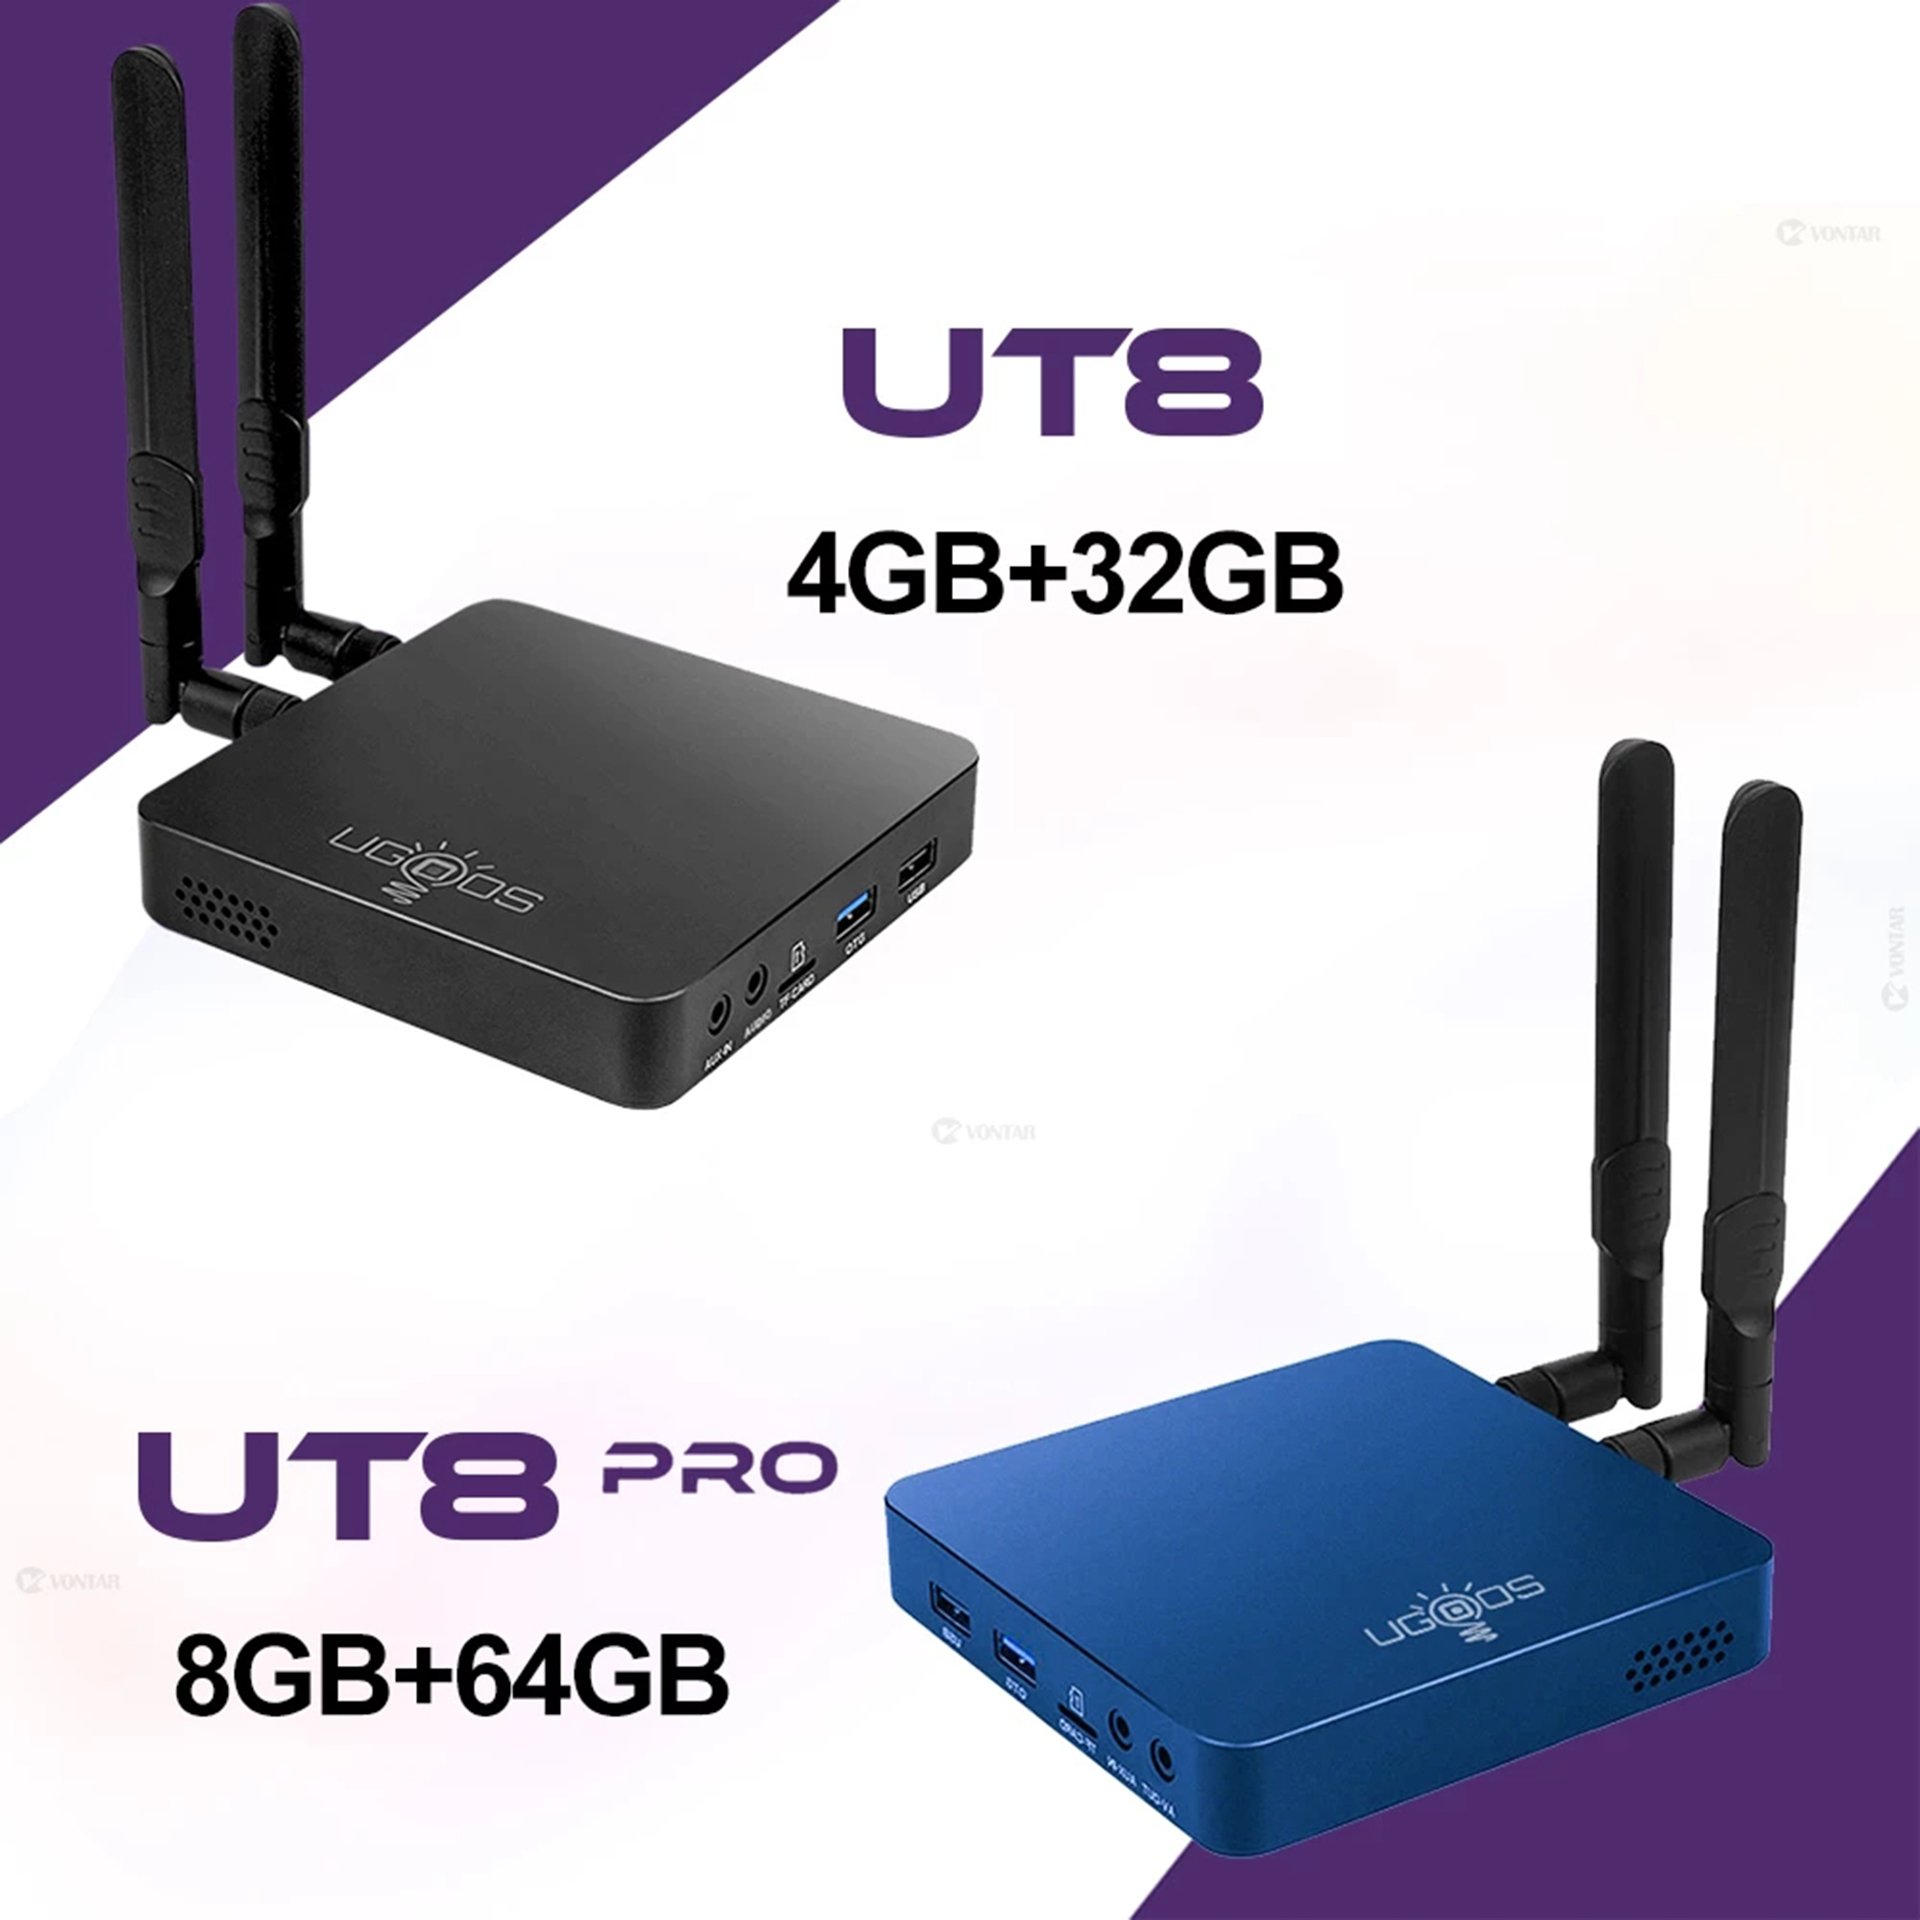 UGOOS UT8 Rockchip RK3568 DDR4 4GB 32GB eMMC Android 11 WIFI 6 1000M LAN 4K@60fps HDR10 BT 5.0 Smart TV BOX with  bluetooth Voice Remote